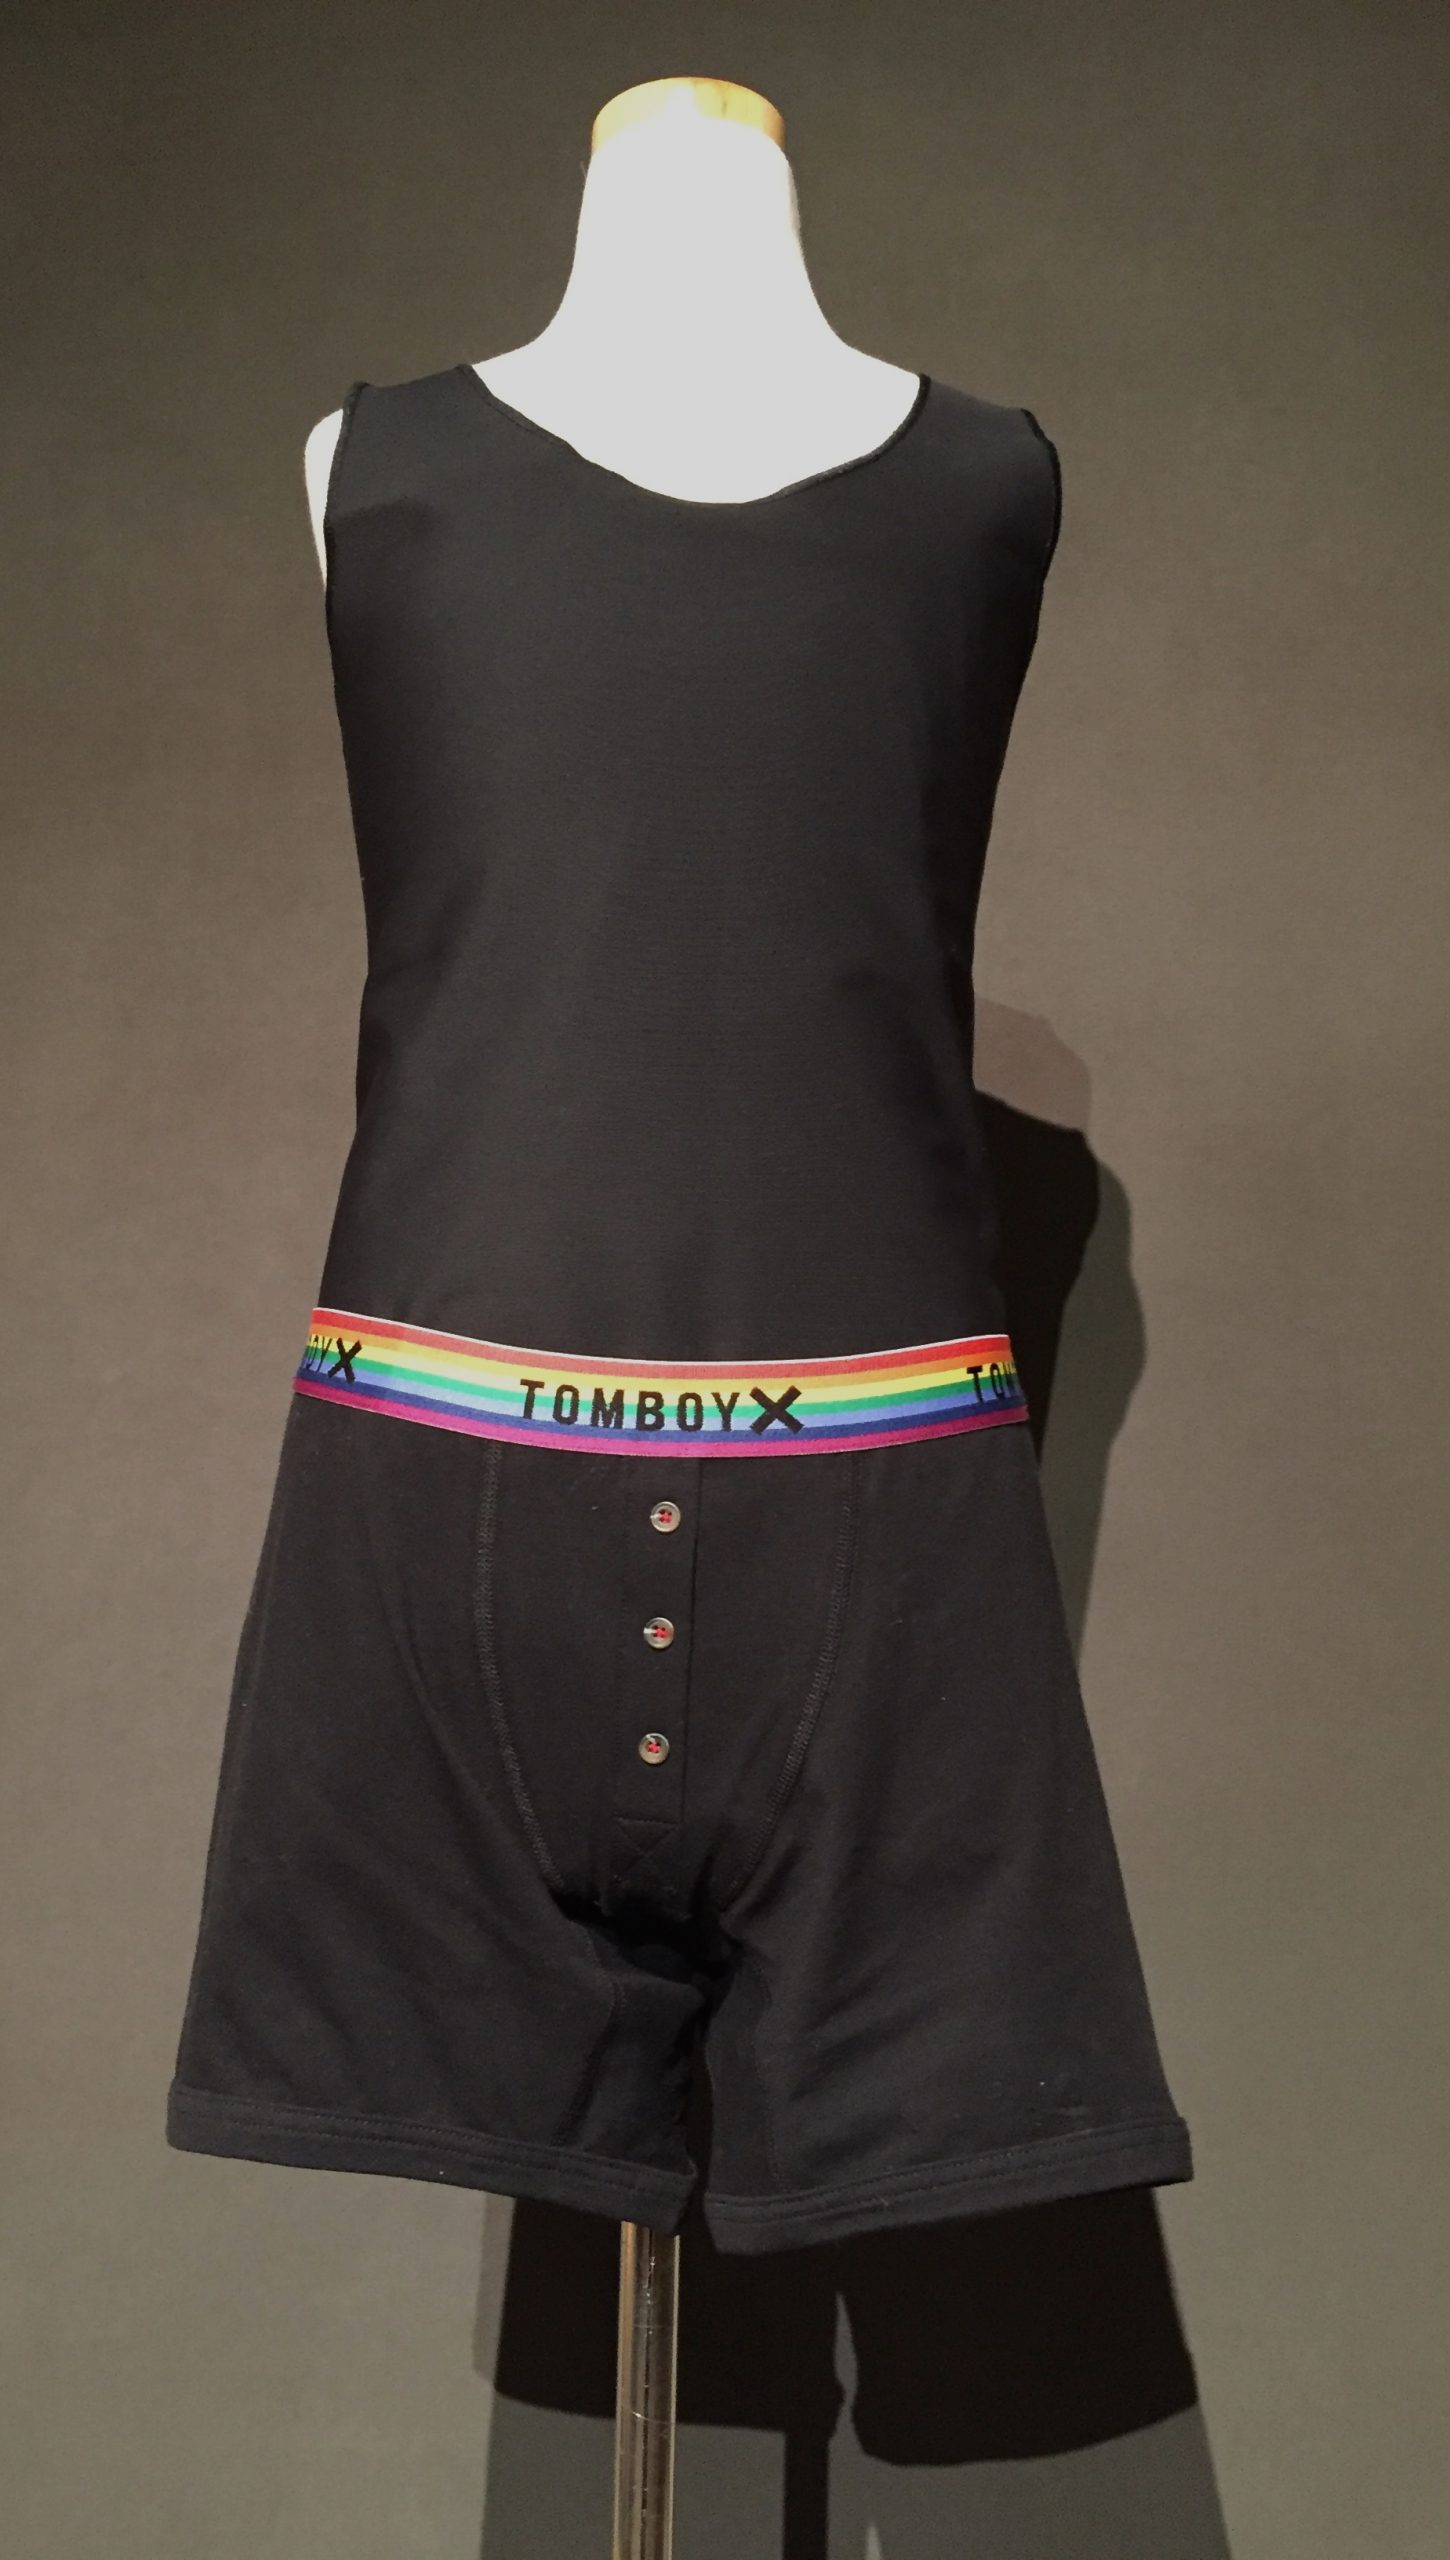 Black chest binder and black boxer brief with rainbow waistband